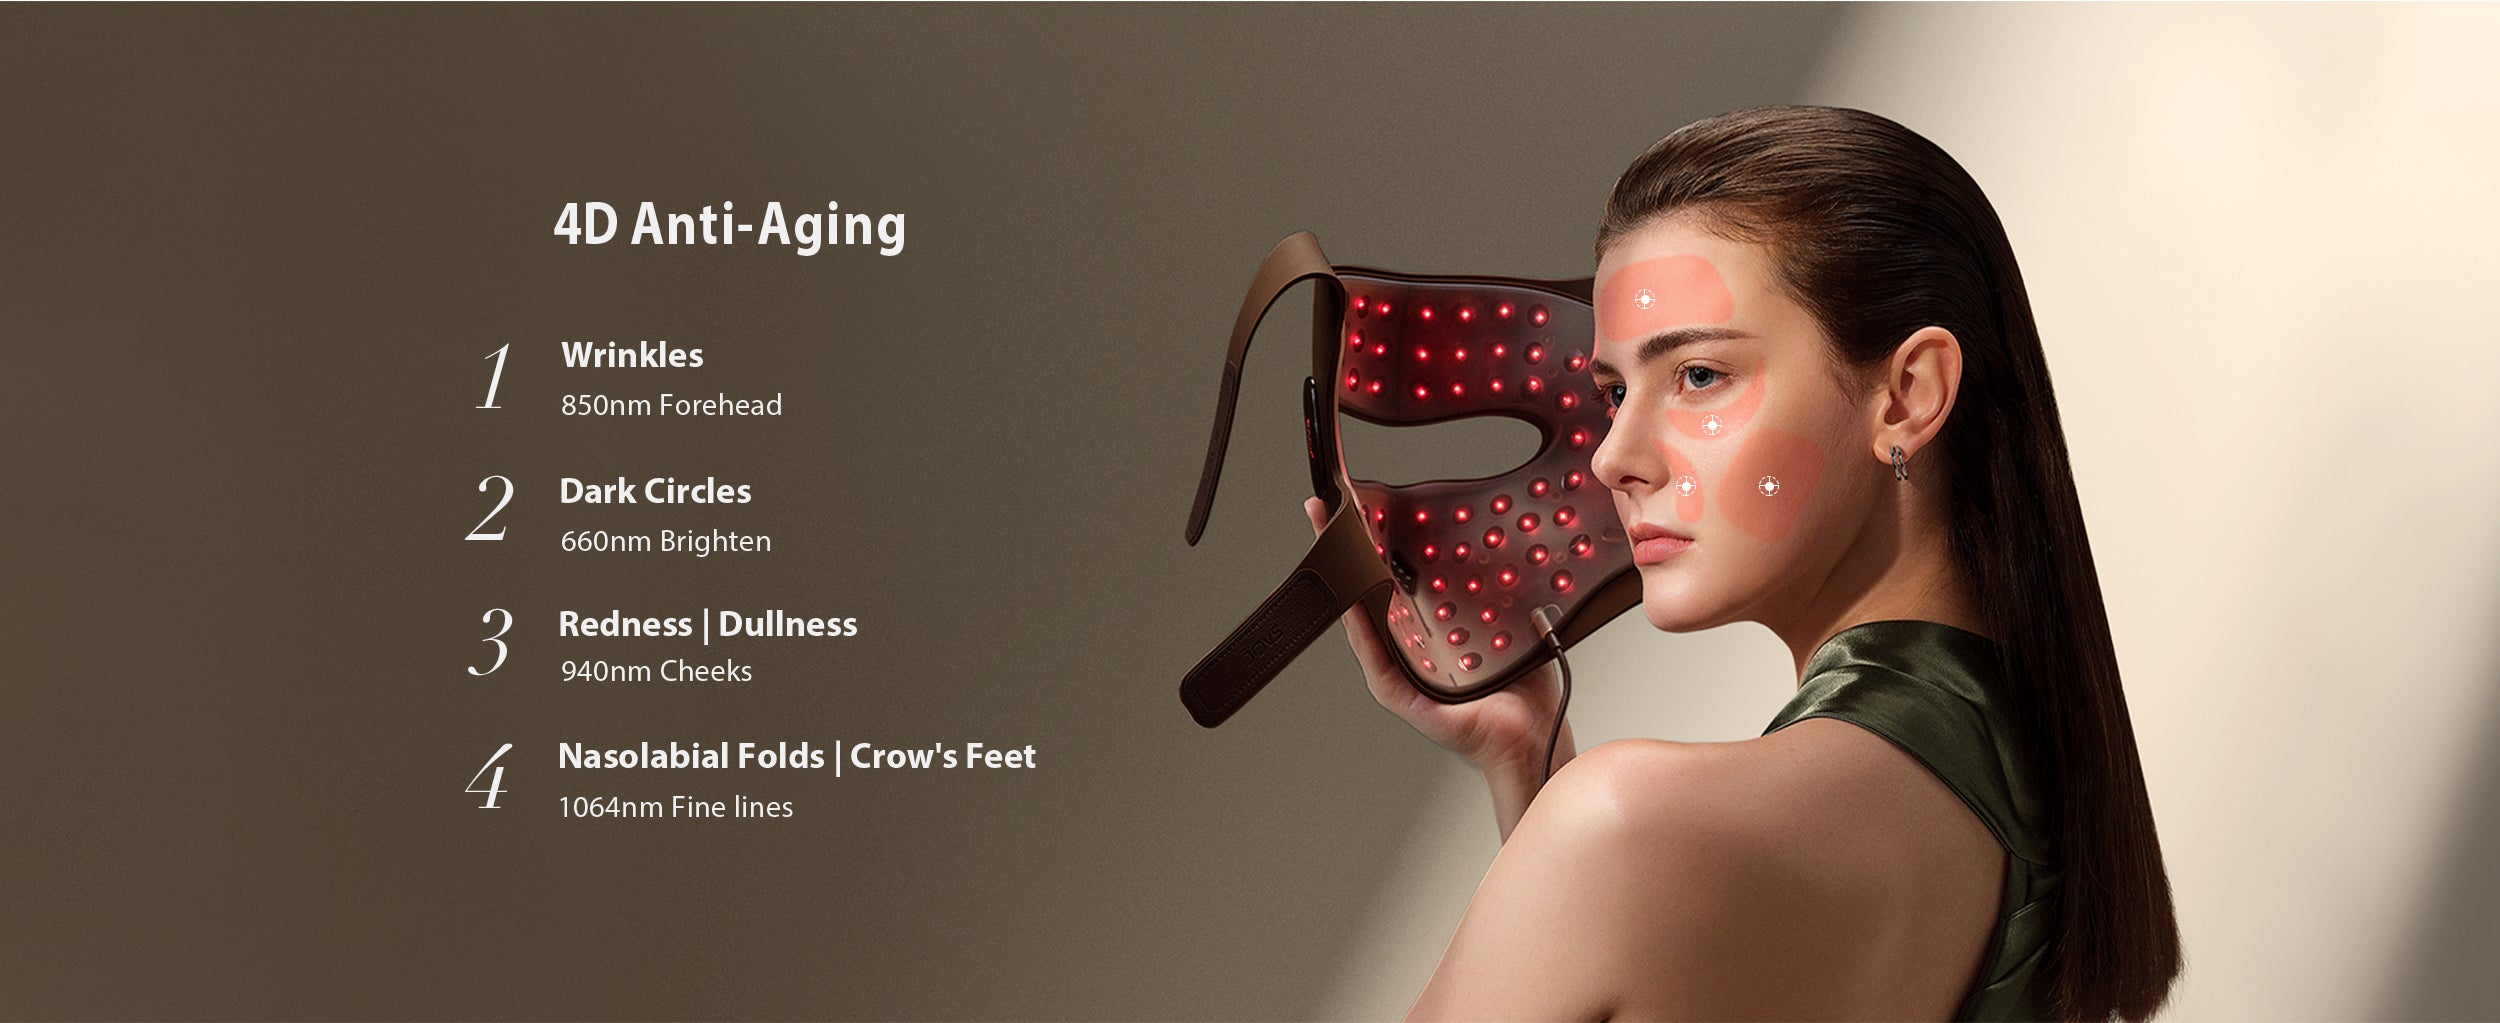 JOVS 4D Laser Mask targeting wrinkles, dark circles, redness, and fine lines with specific light wavelengths for comprehensive anti-aging treatment.